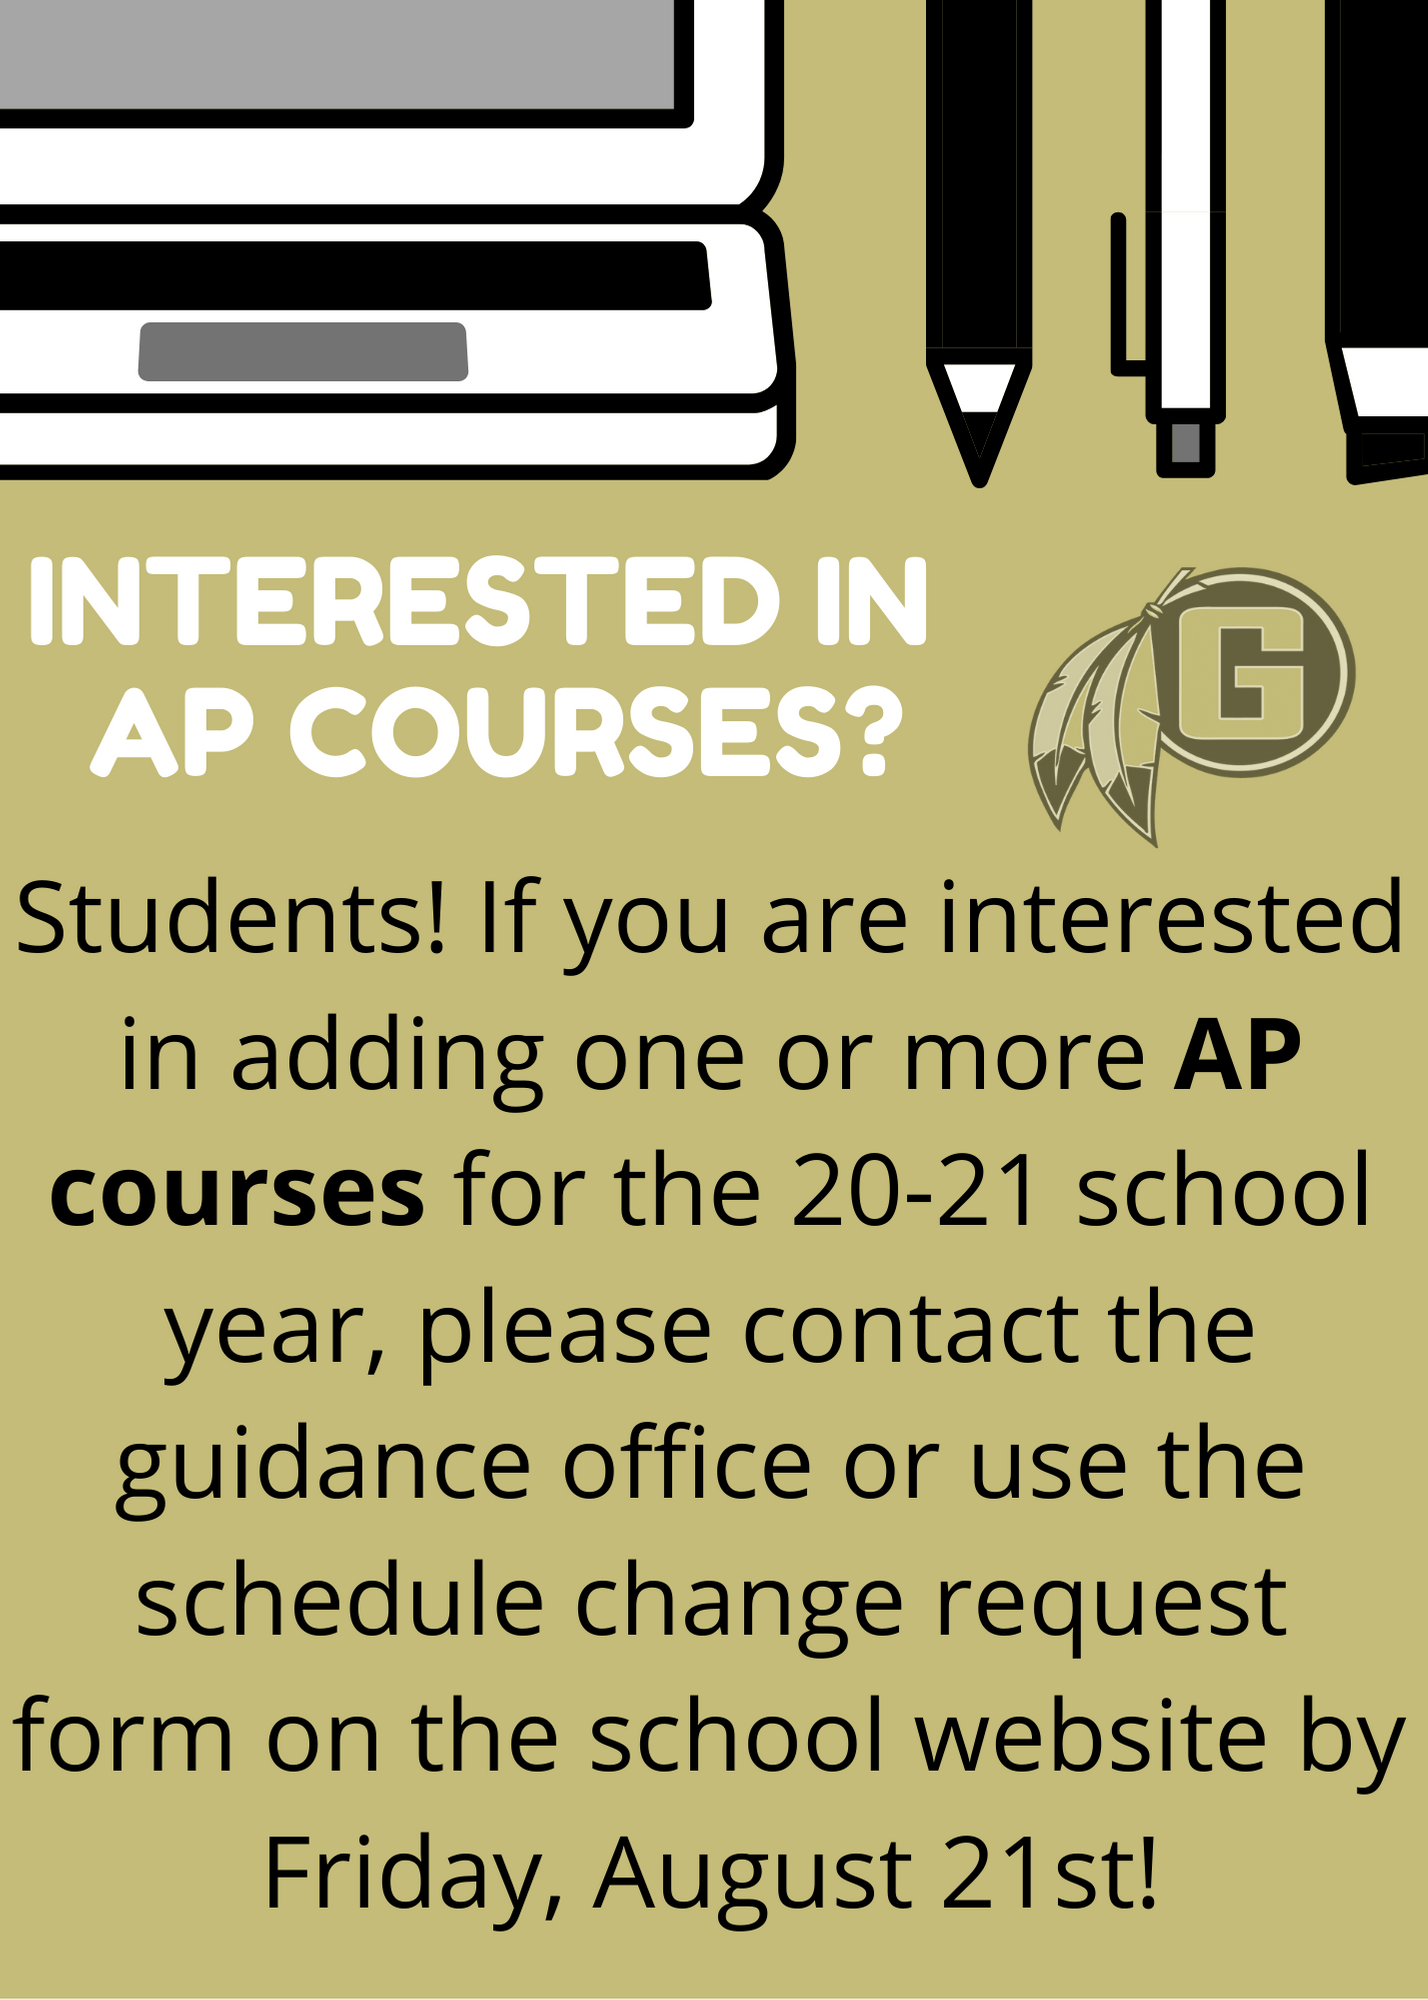 Interested in AP Courses?